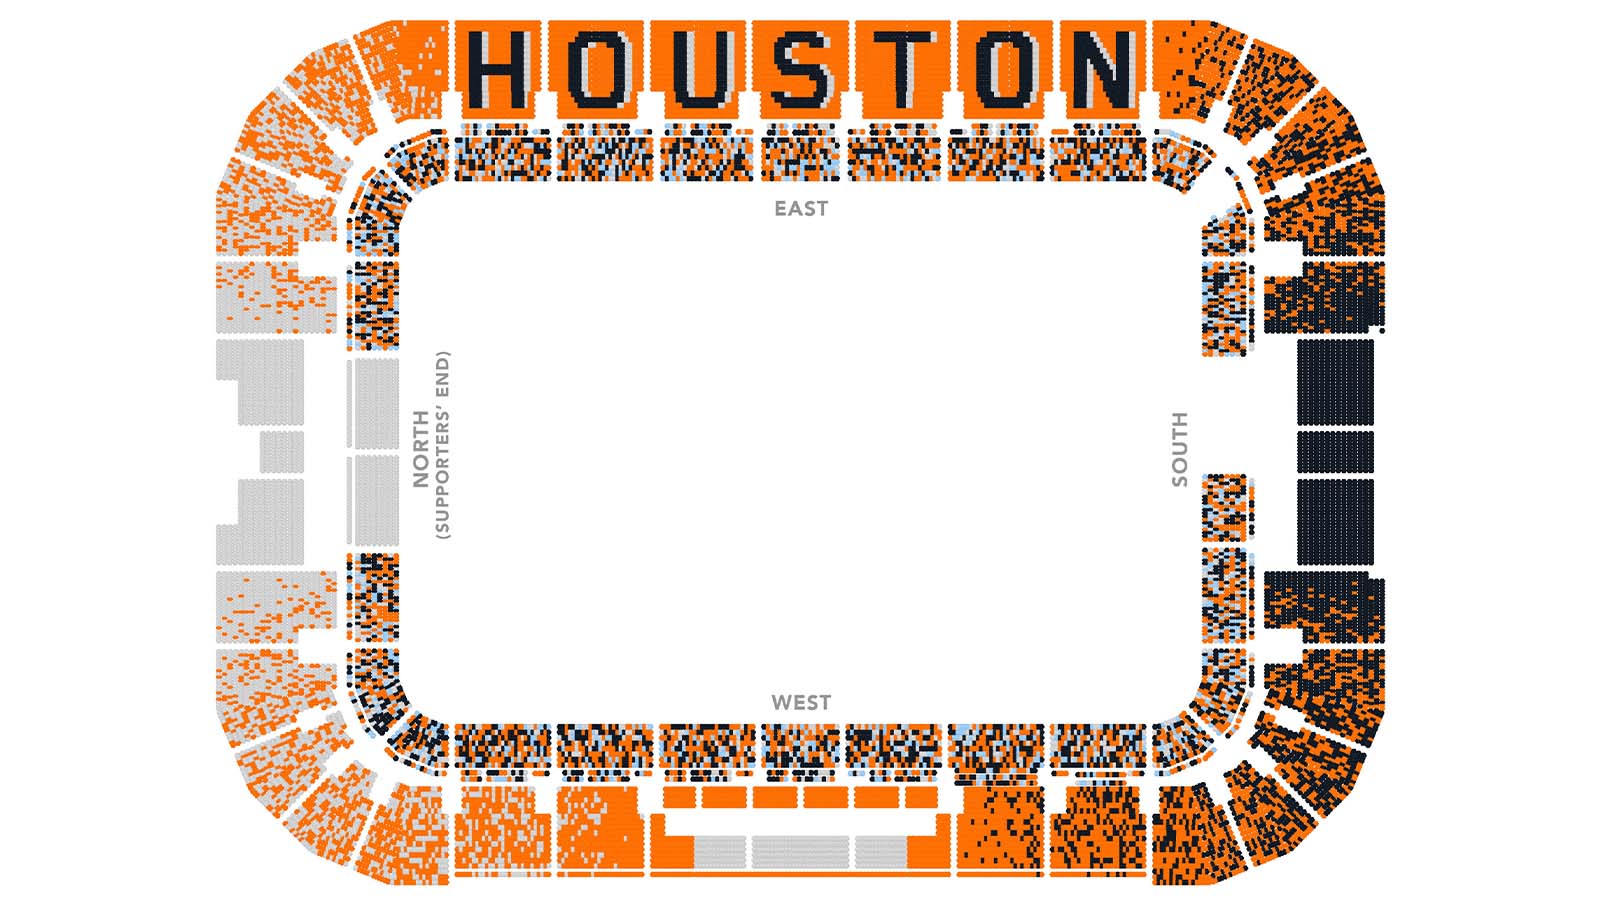 Houston Dynamo and Dash fans can avoid the hot seat as part of PNC